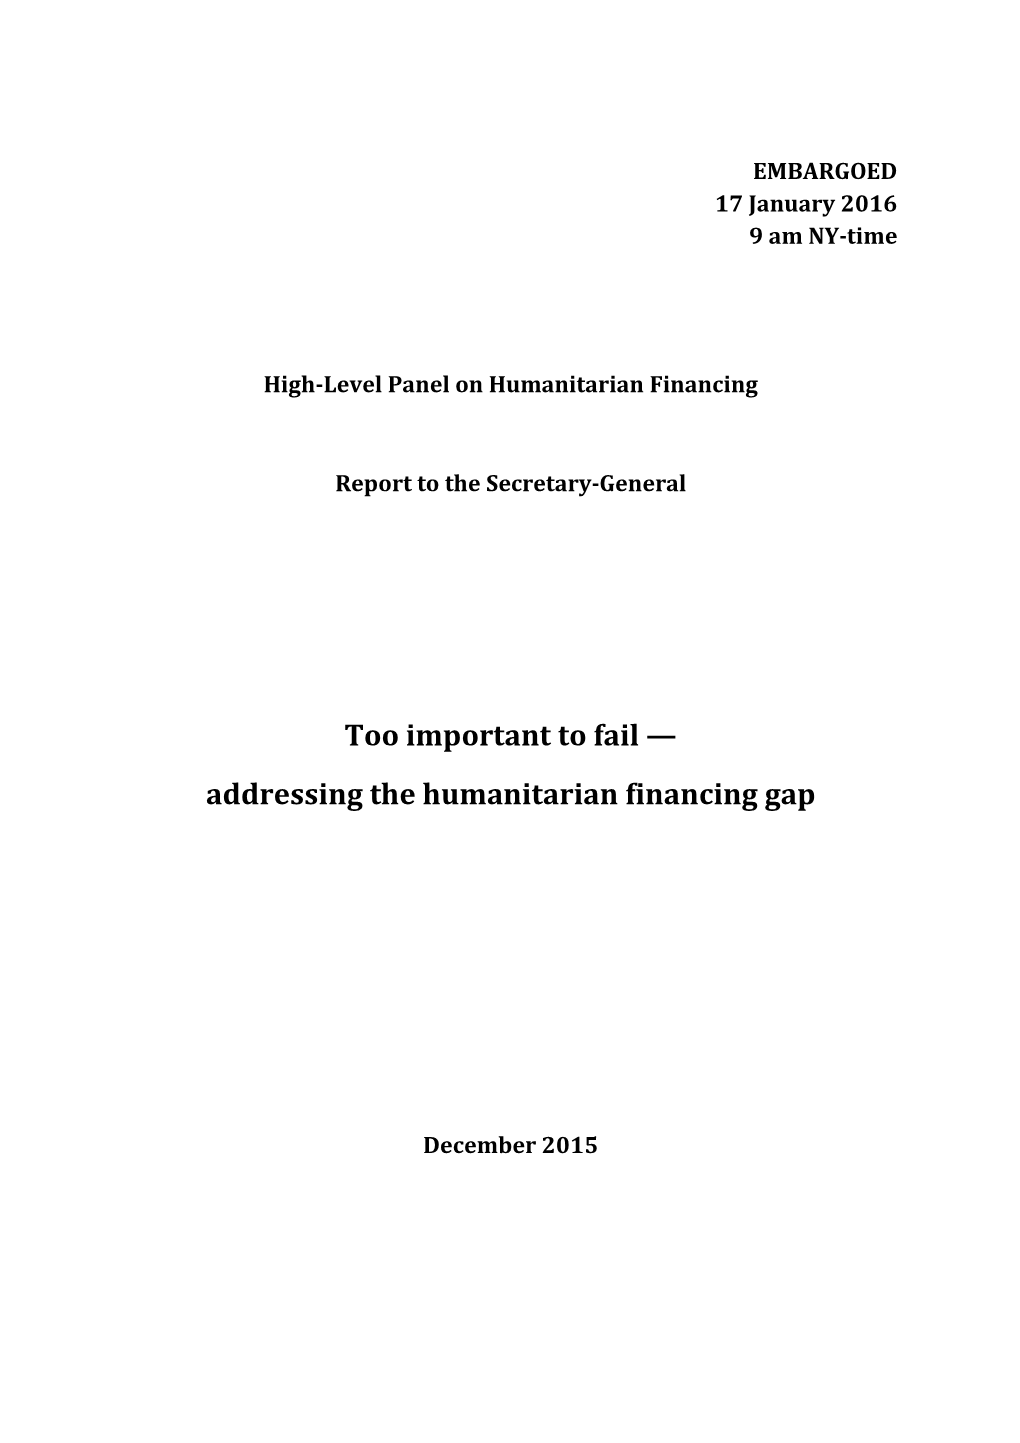 Too Important to Fail — Addressing the Humanitarian Financing Gap